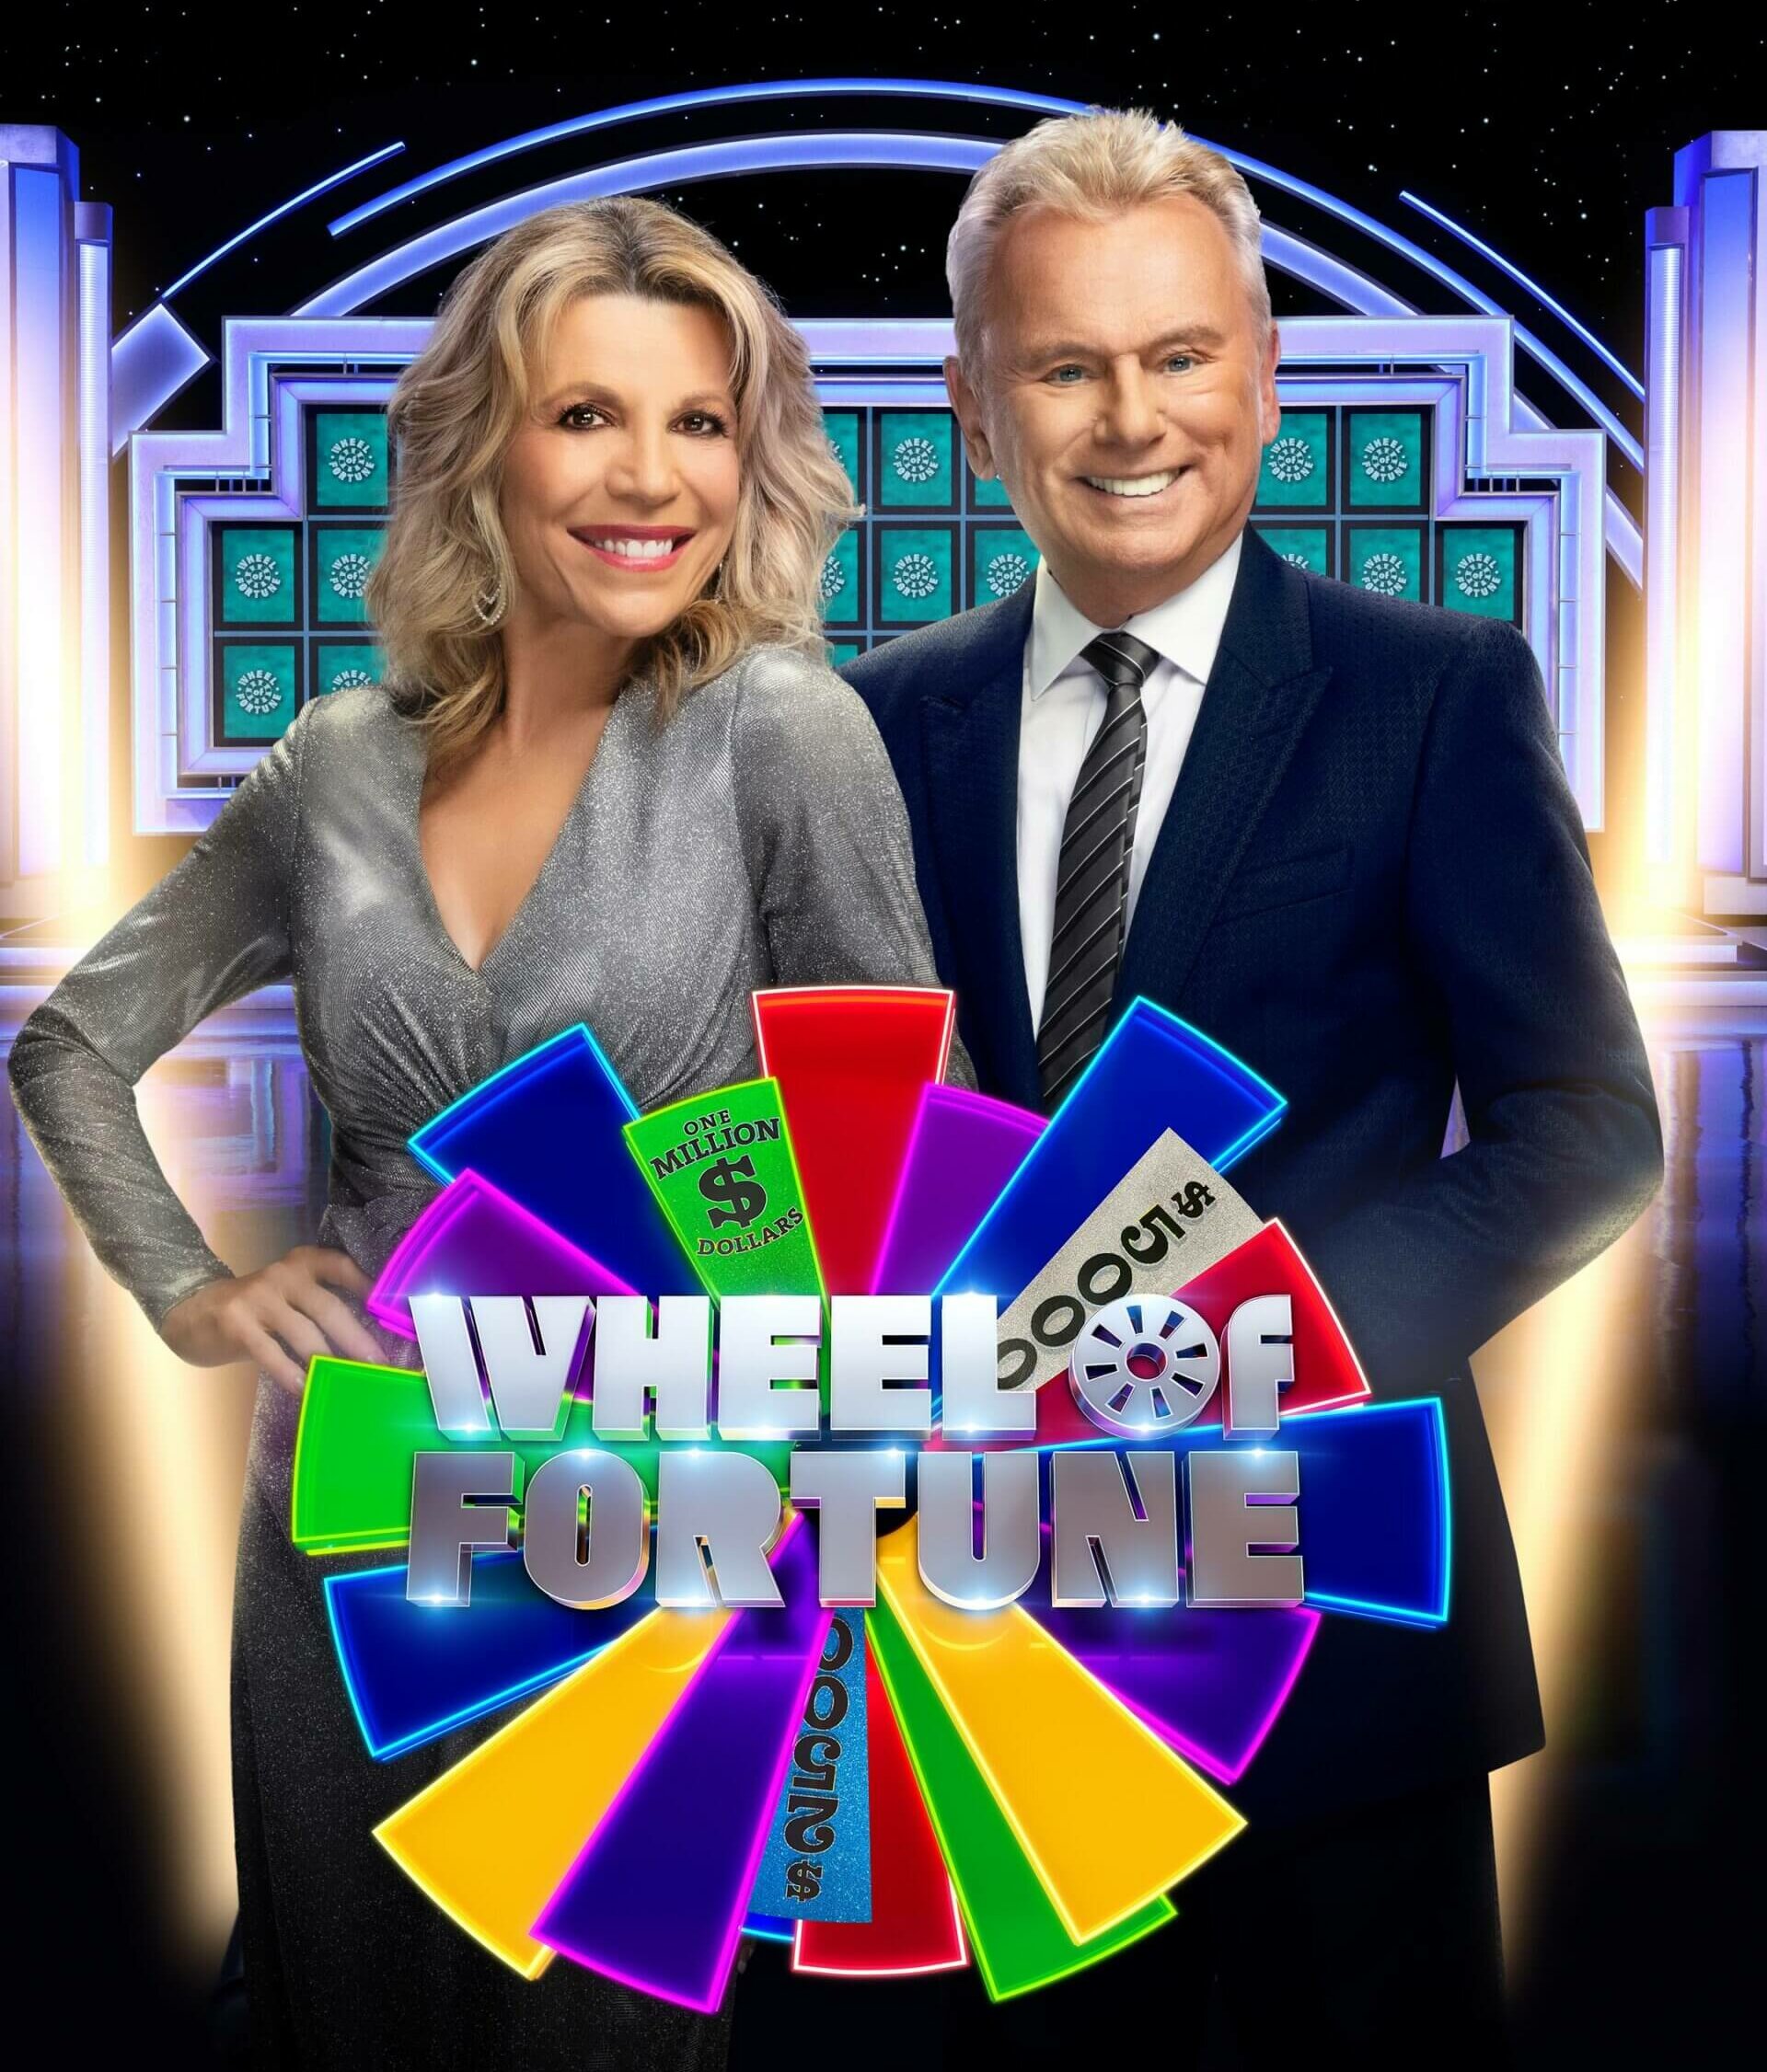 The hosts of Wheel of Fortune